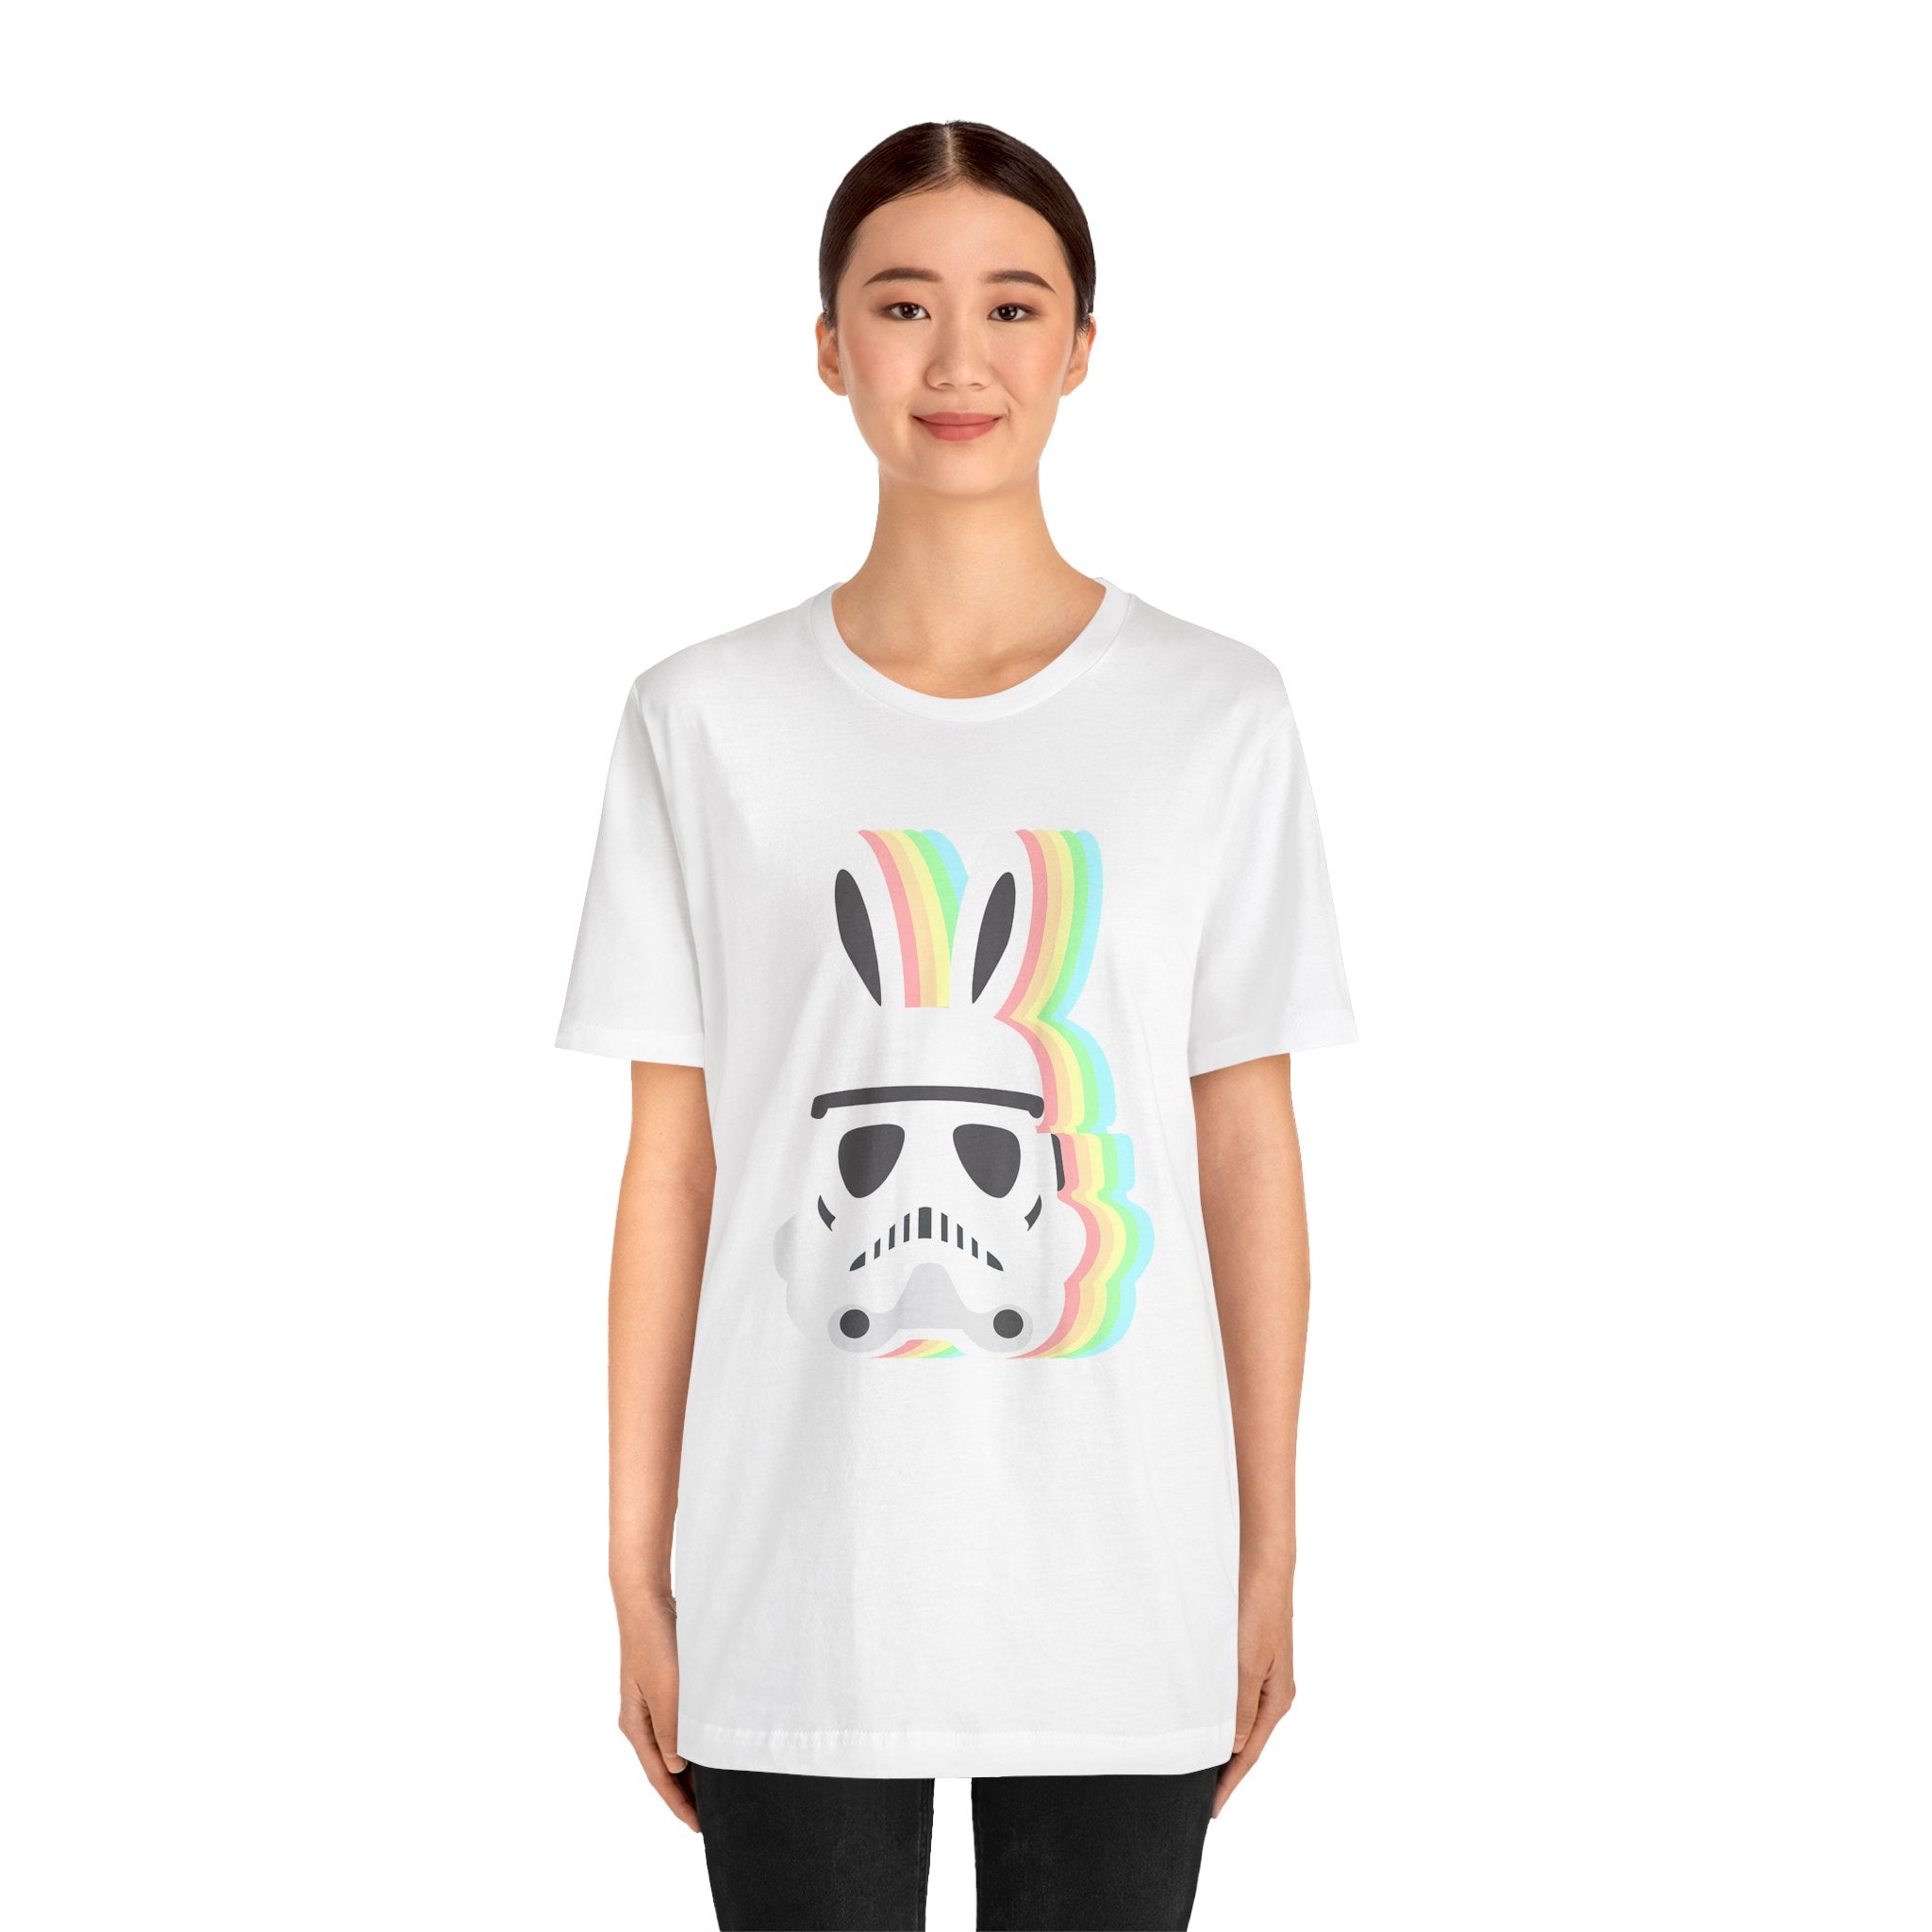 A young woman wearing a white tee featuring a graphic of the Easter Stormtrooper Bunny with colorful stripes.